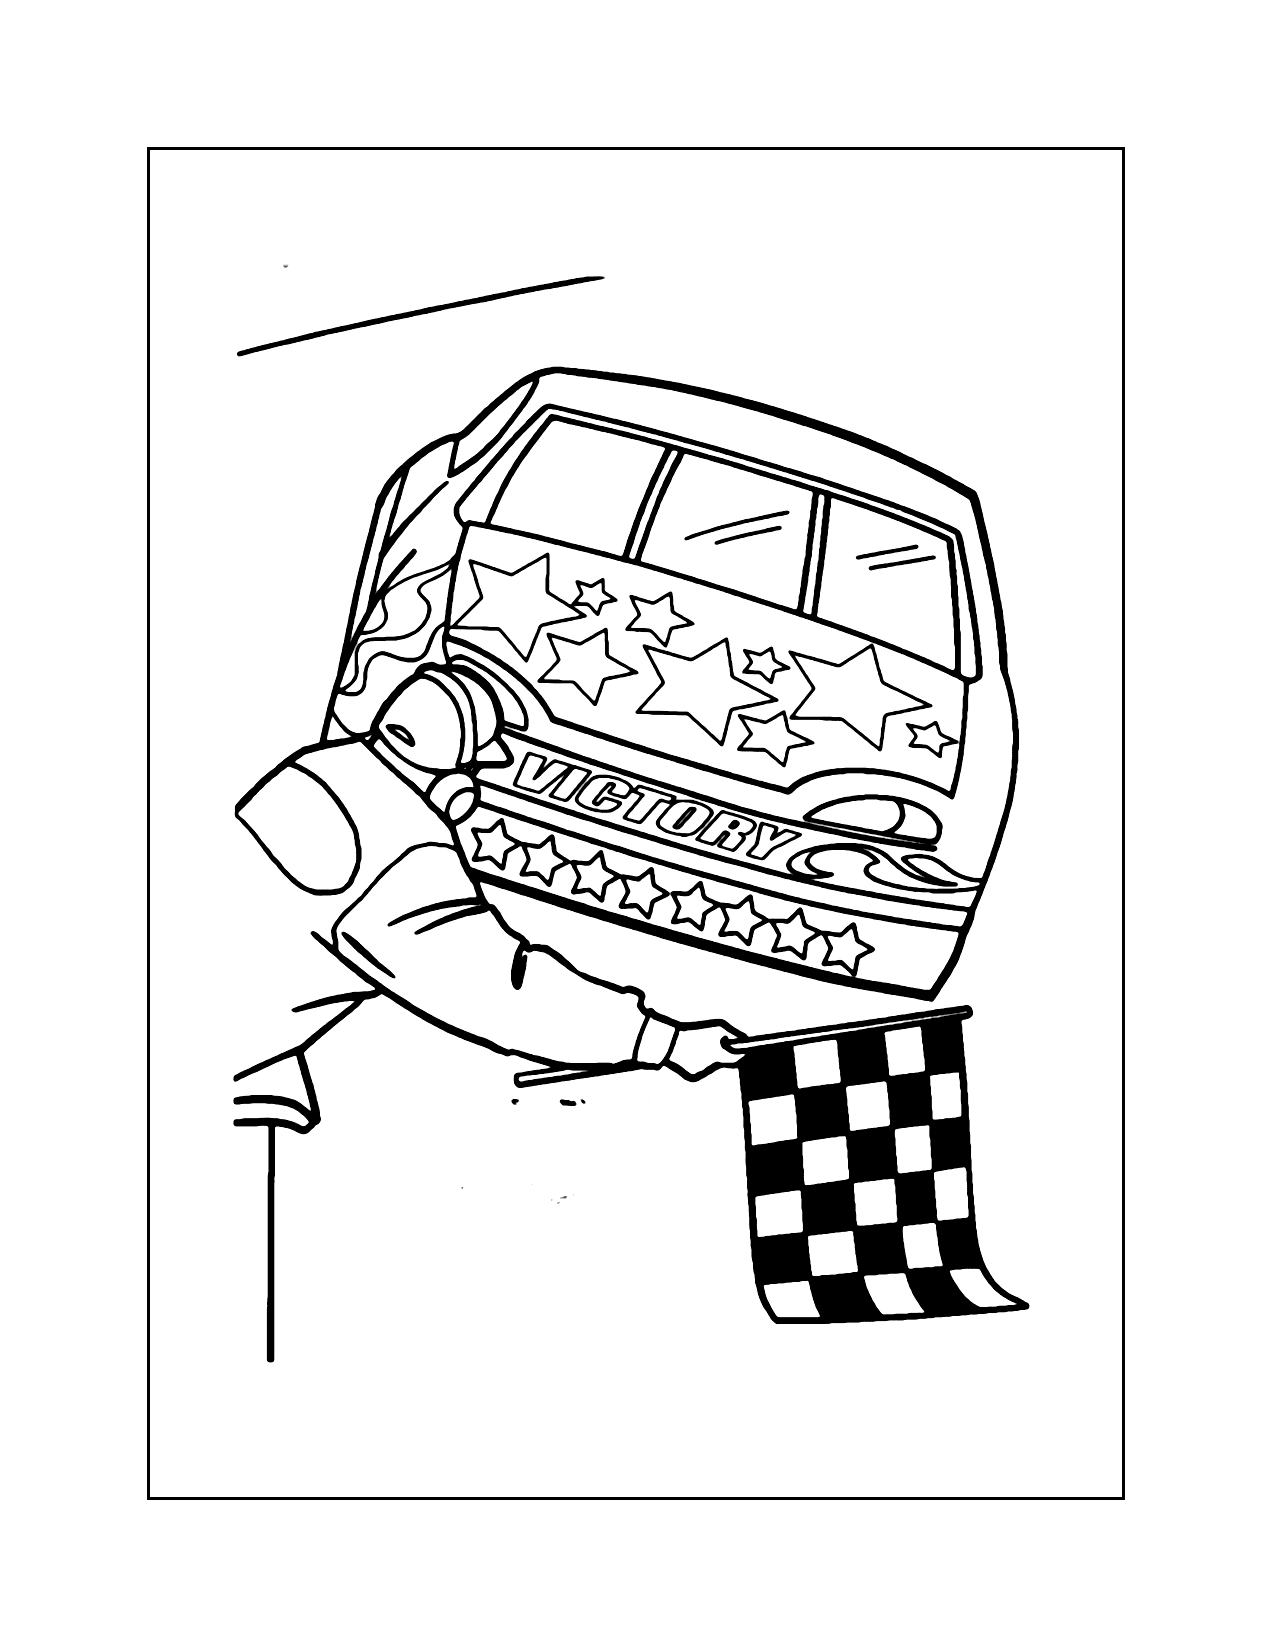 Victory Race Car With Stars Coloring Page